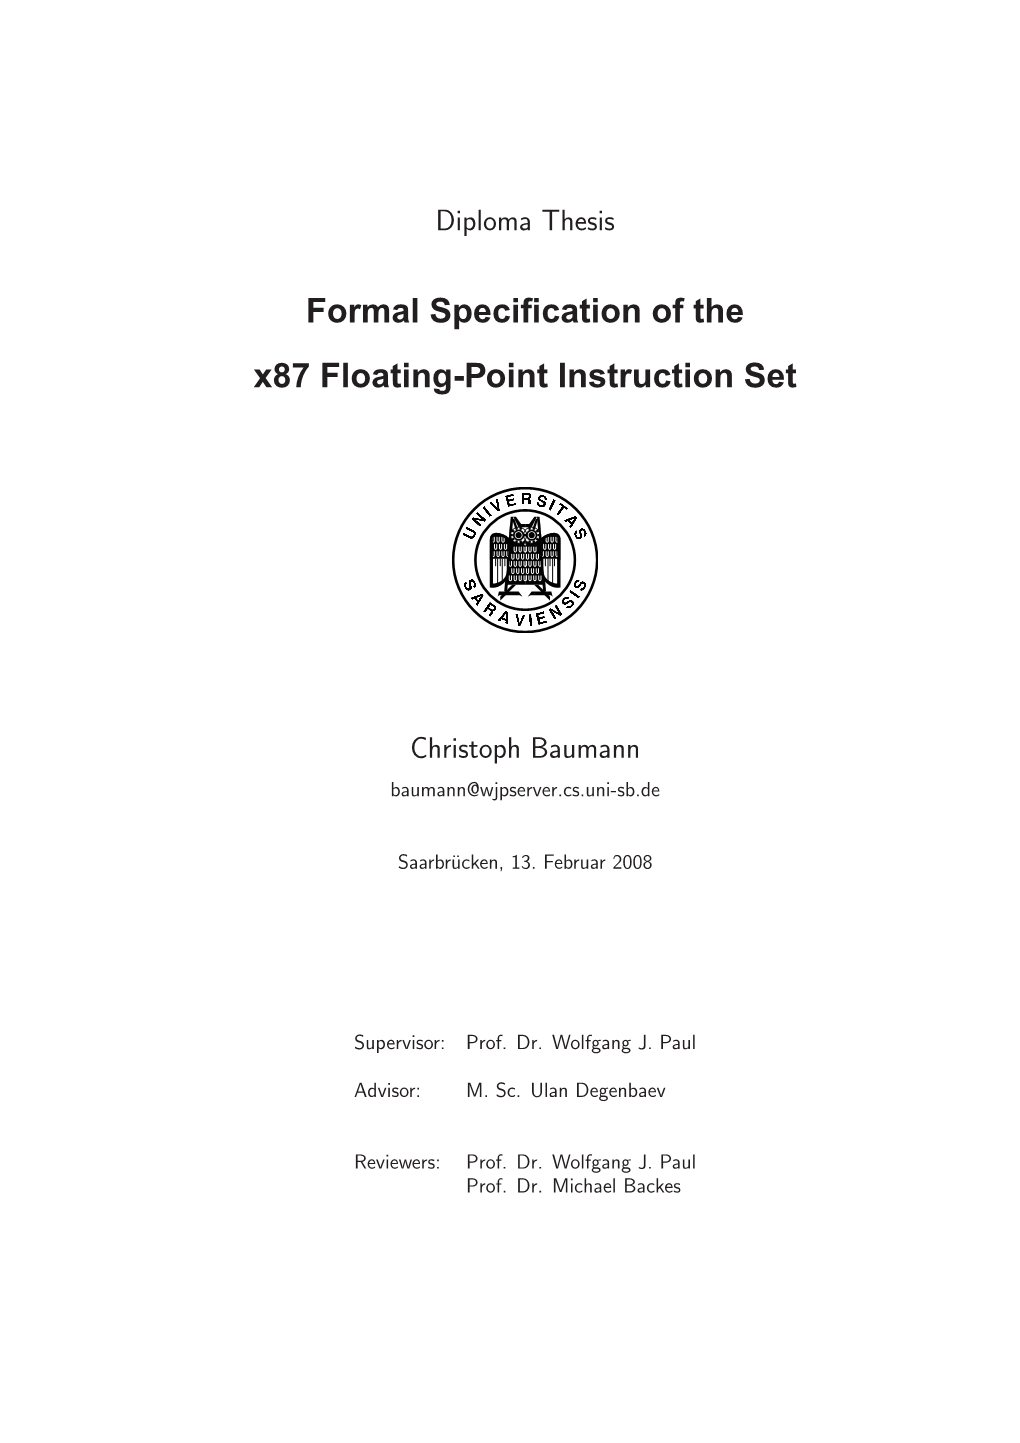 Formal Specification of the X87 Floating-Point Instruction